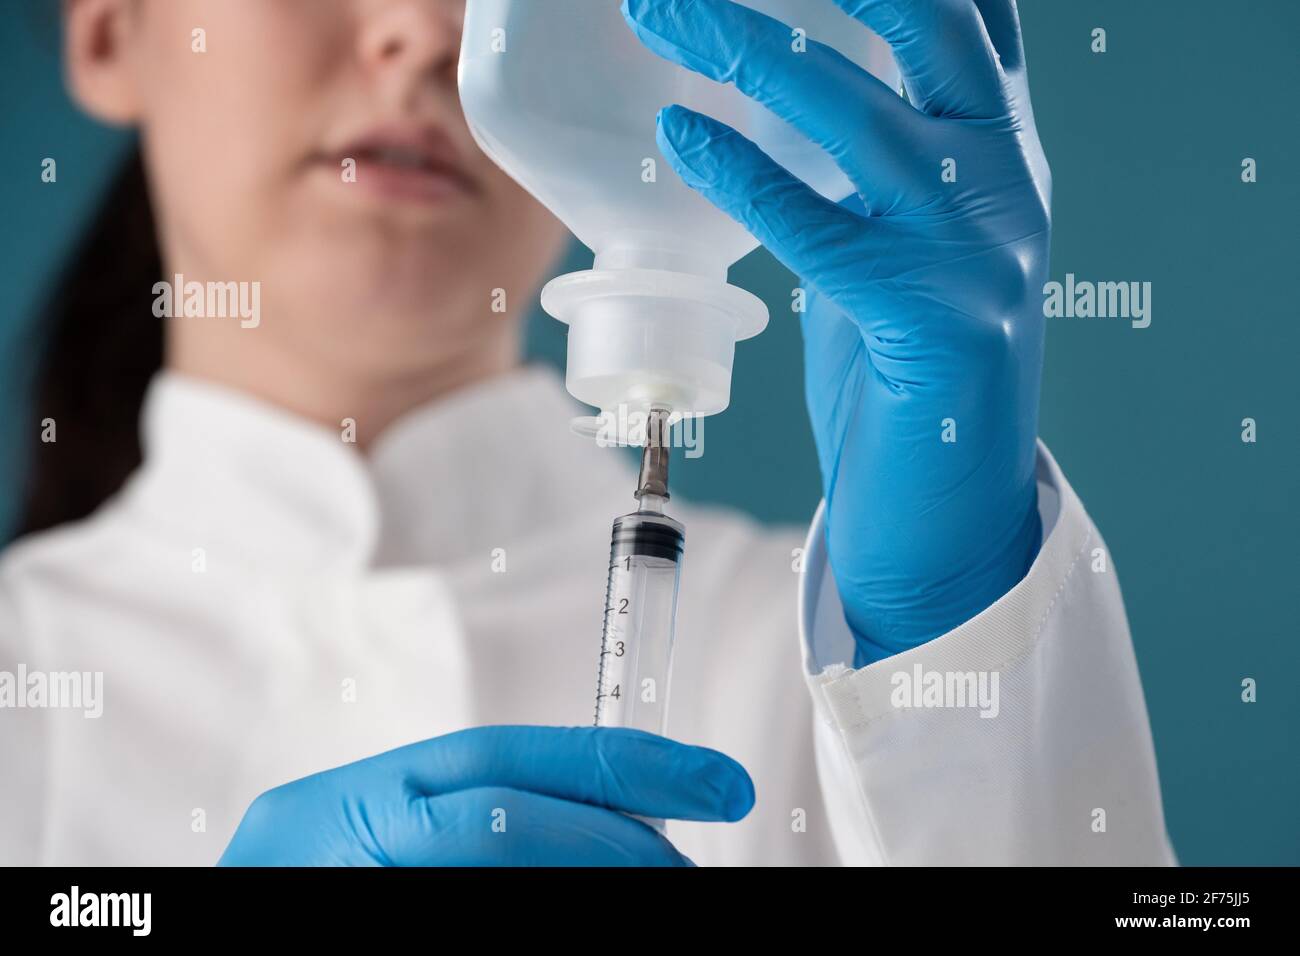 A young woman health worker draws a solution from a vial into a syringe for injection. Stock Photo